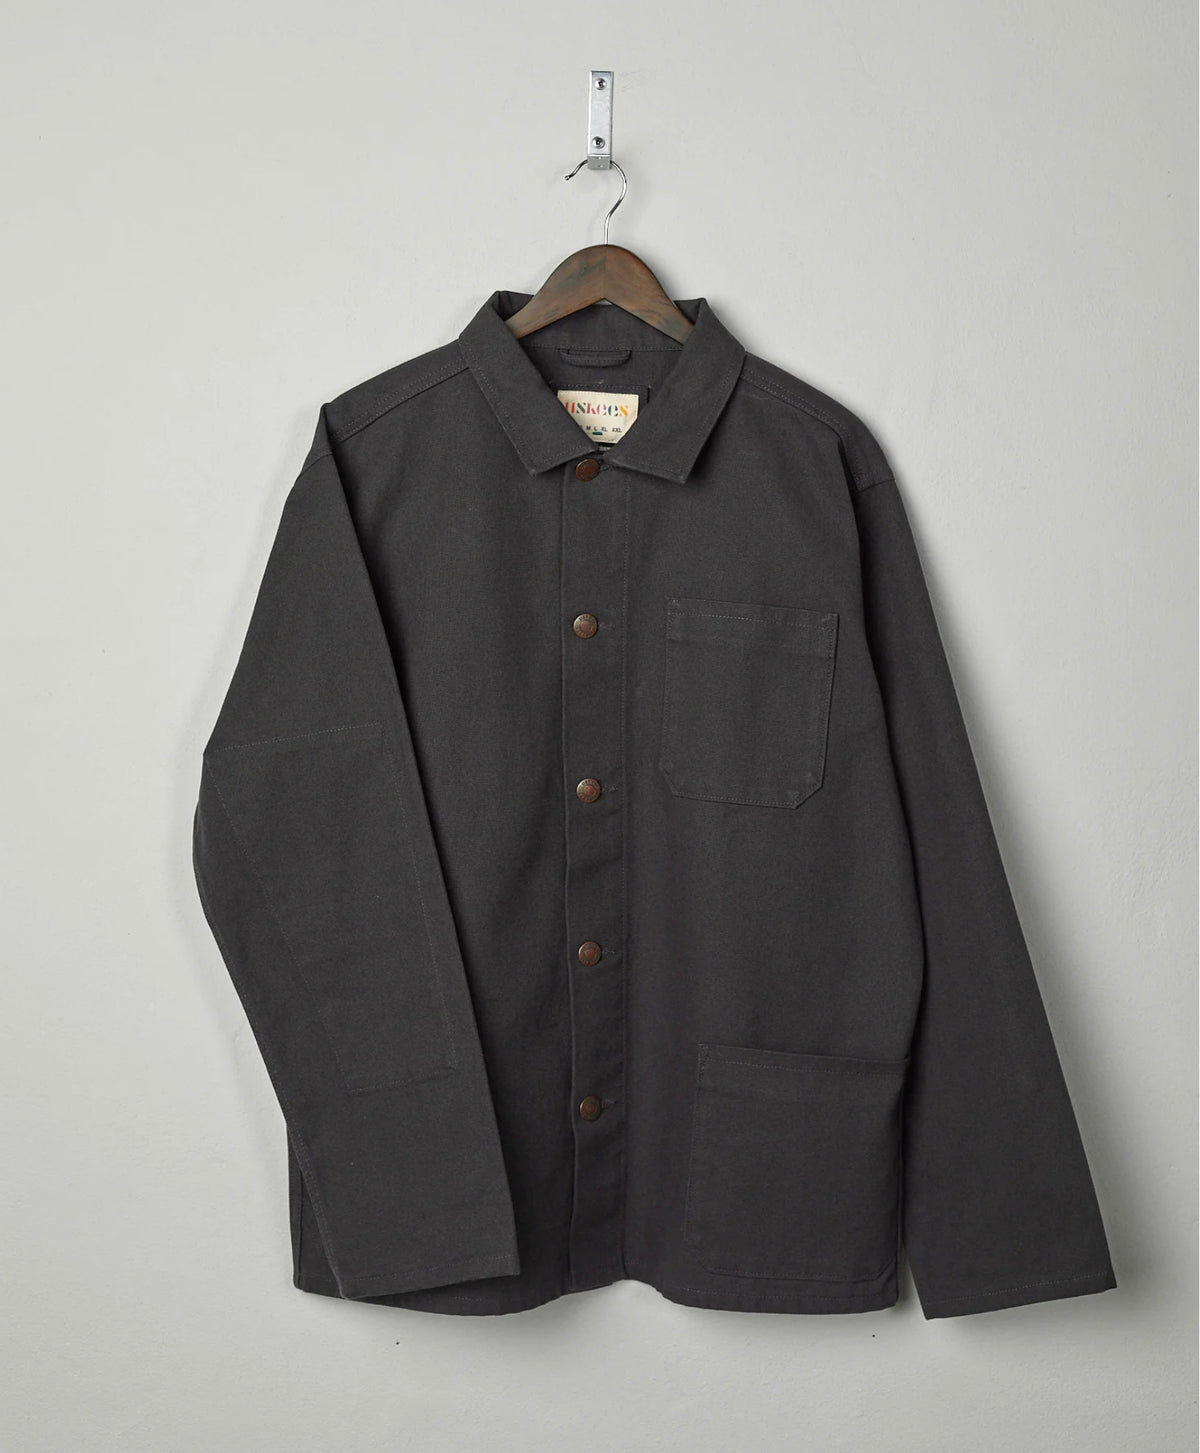 USKEES #3027 Heavy Canvas Button Overshirt - Charcoal